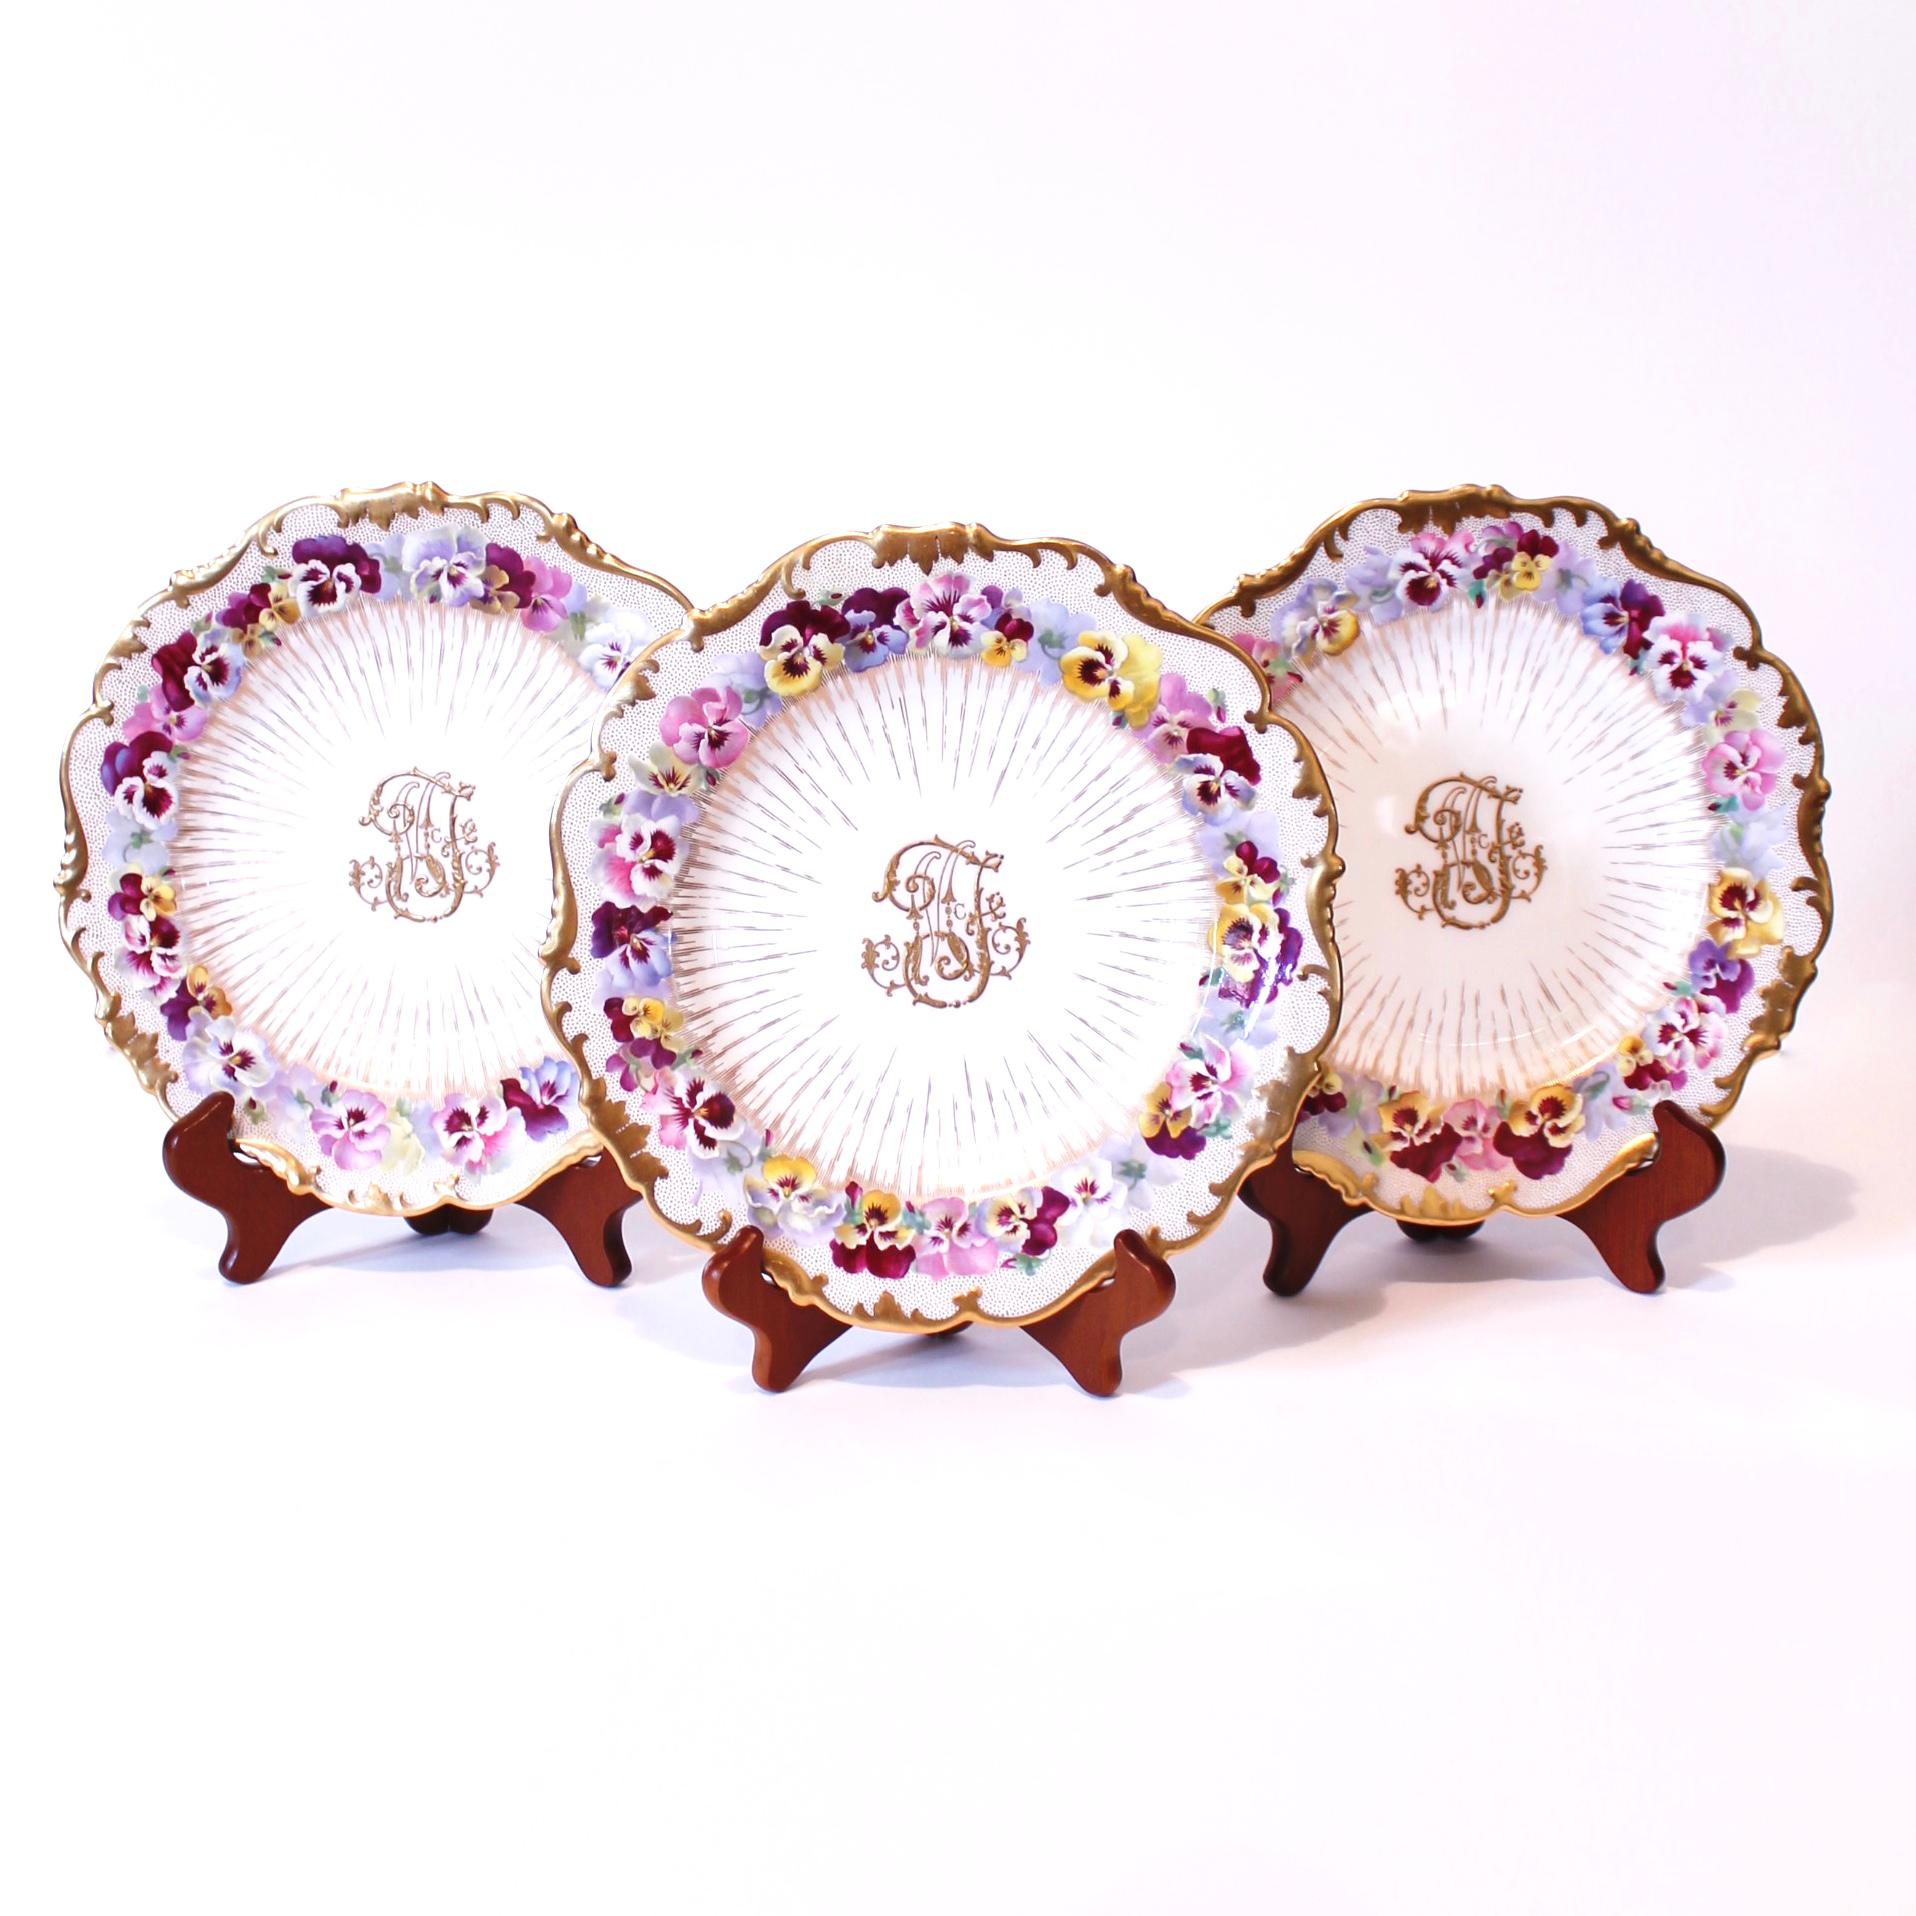 A remarkably large and beautiful set of richly gilt decorated antique English porcelain dessert plates made by Cauldon, probably dating ca. 1910. Each plate is unique with each rim hand painted with a fresh hued garland of pansies. All are in